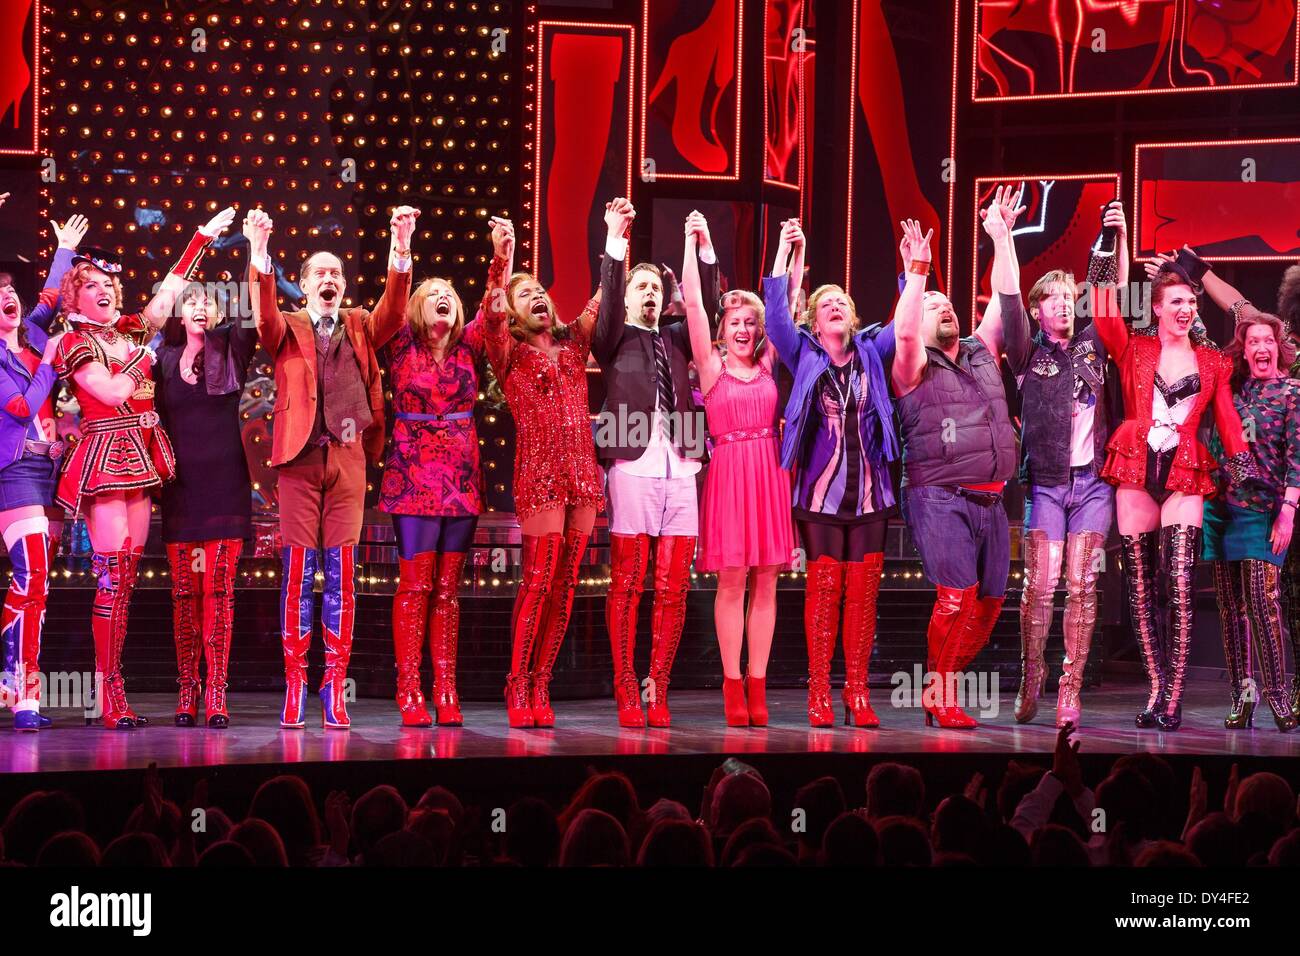 New York, NY, USA. 6th Apr, 2014. Kinky Boots in attendance for KINKY BOOTS  One Year Anniversary On Broadway, The Hirschfeld Theatre, New York, NY  April 6, 2014. Credit: Jason Smith/Everett Collection/Alamy